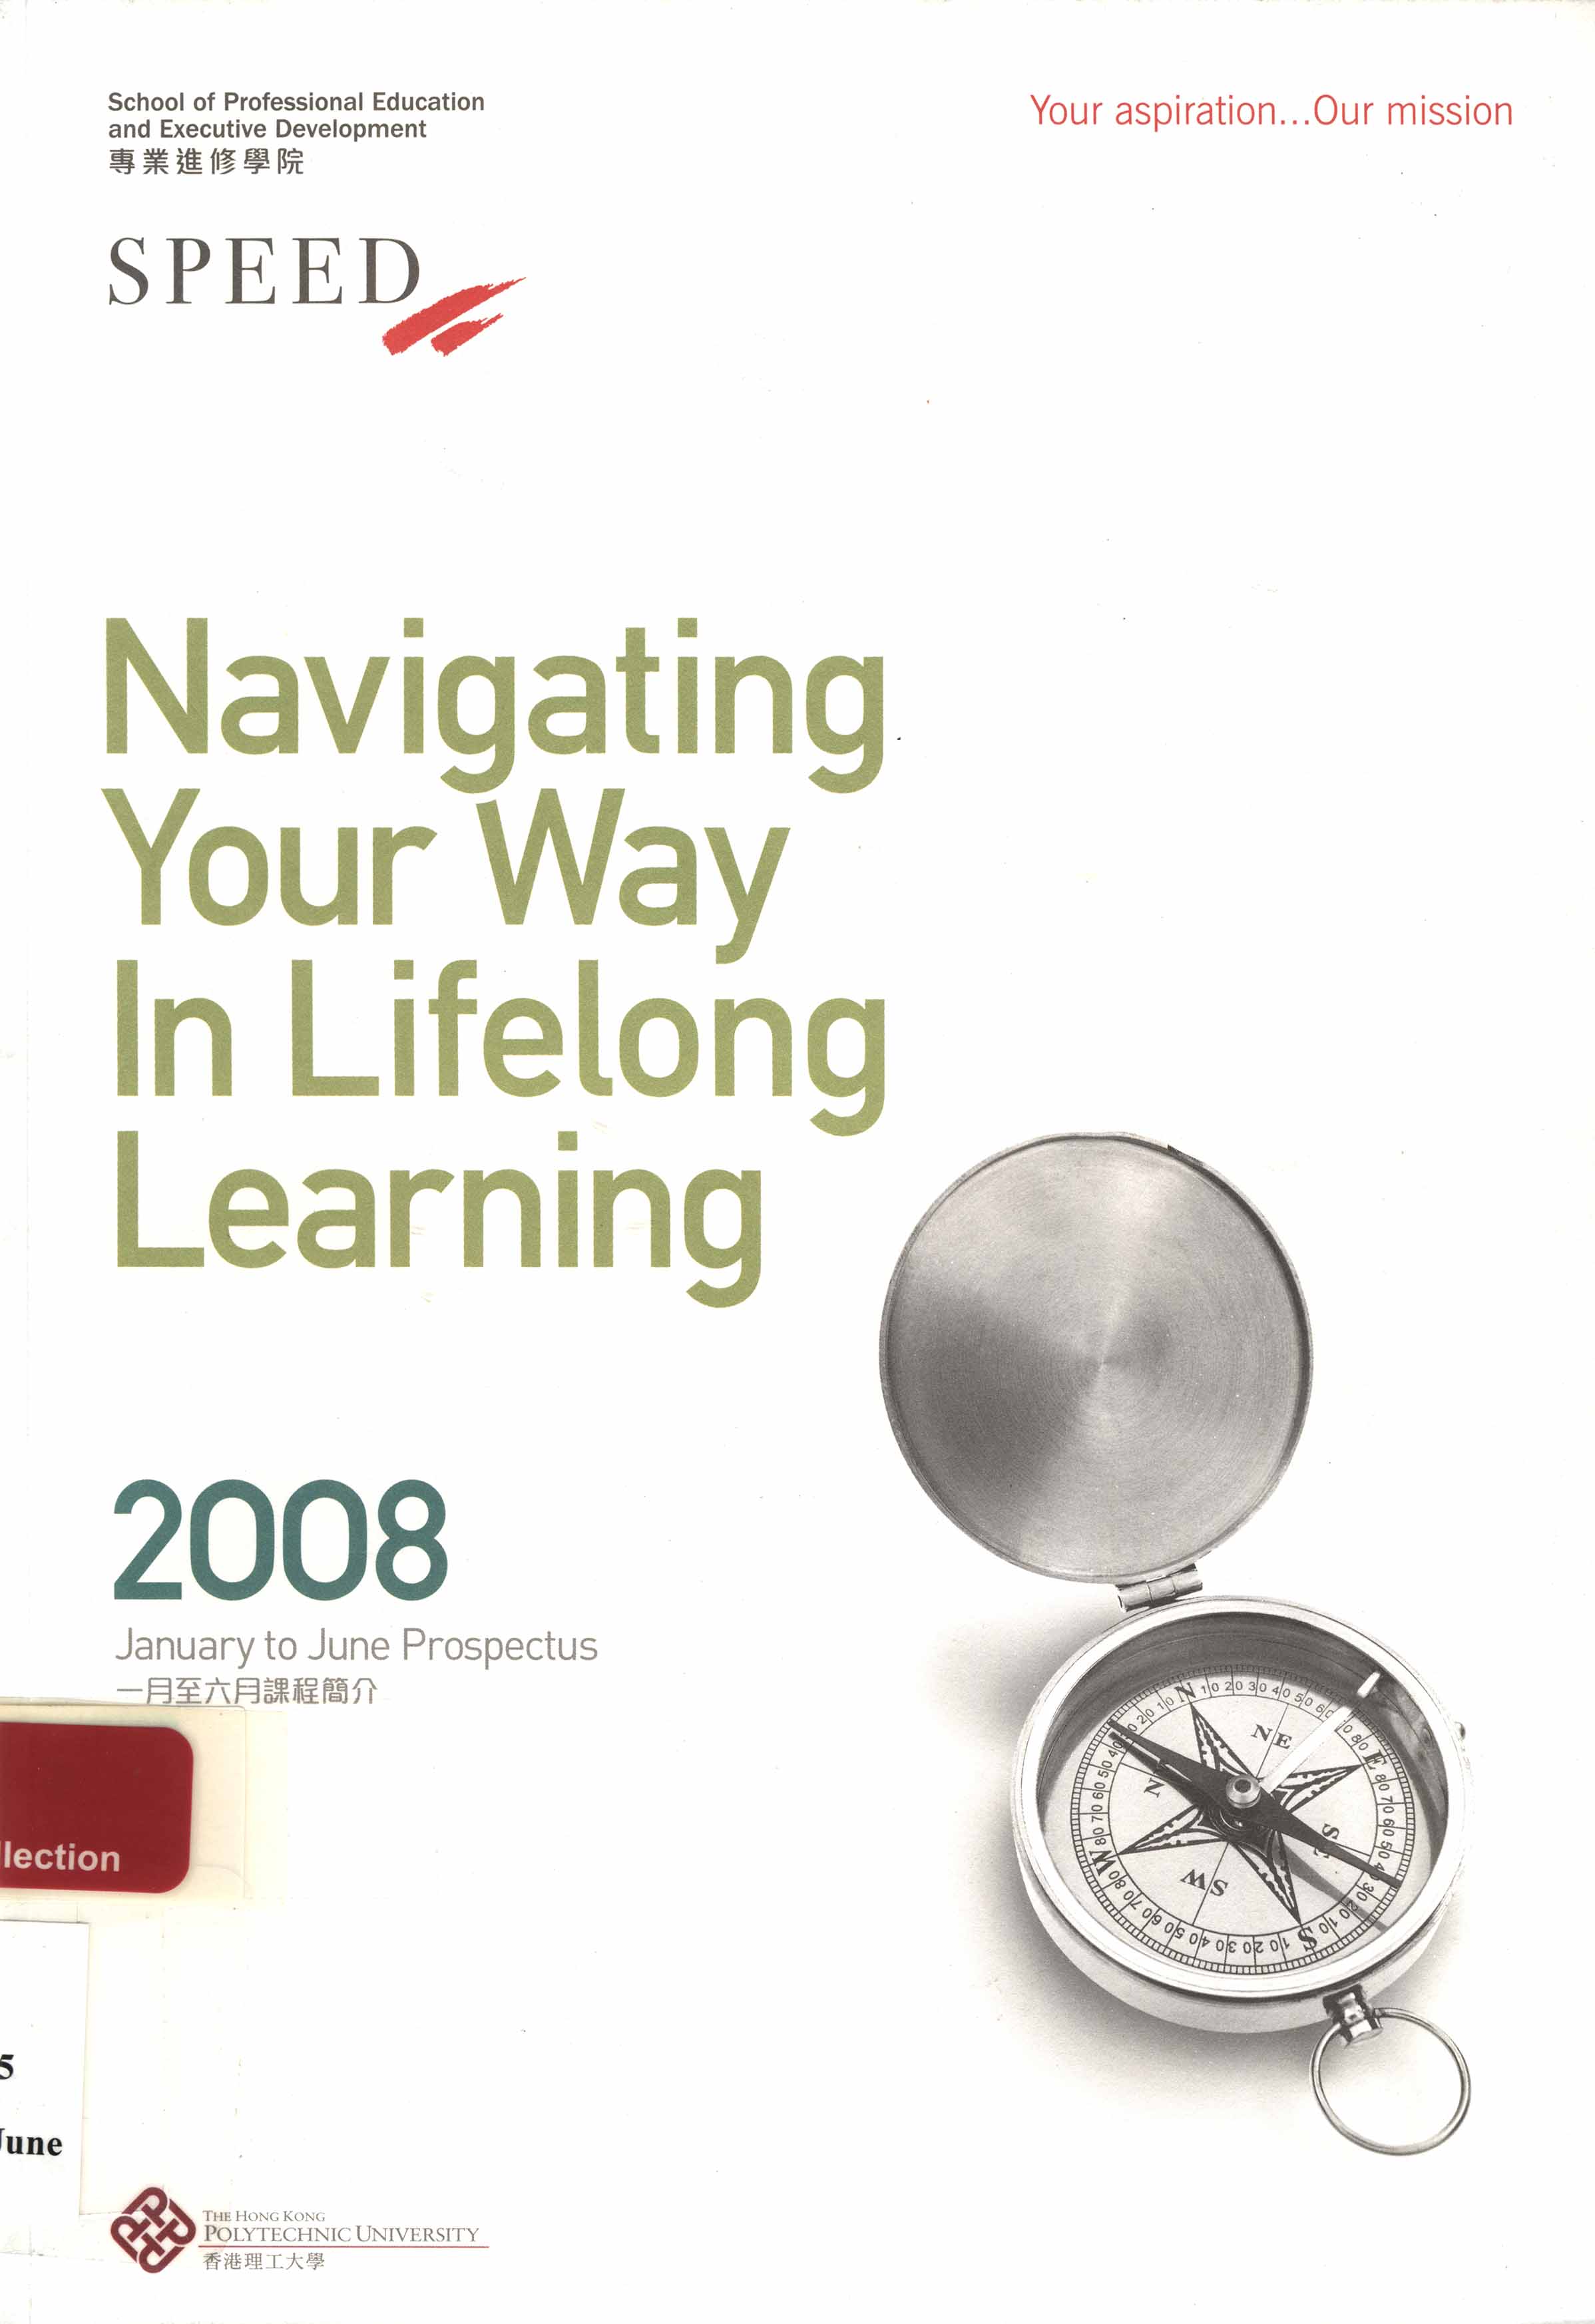 Prospectus [School of Professional Education and Executive Development (SPEED) - January to June 2008]